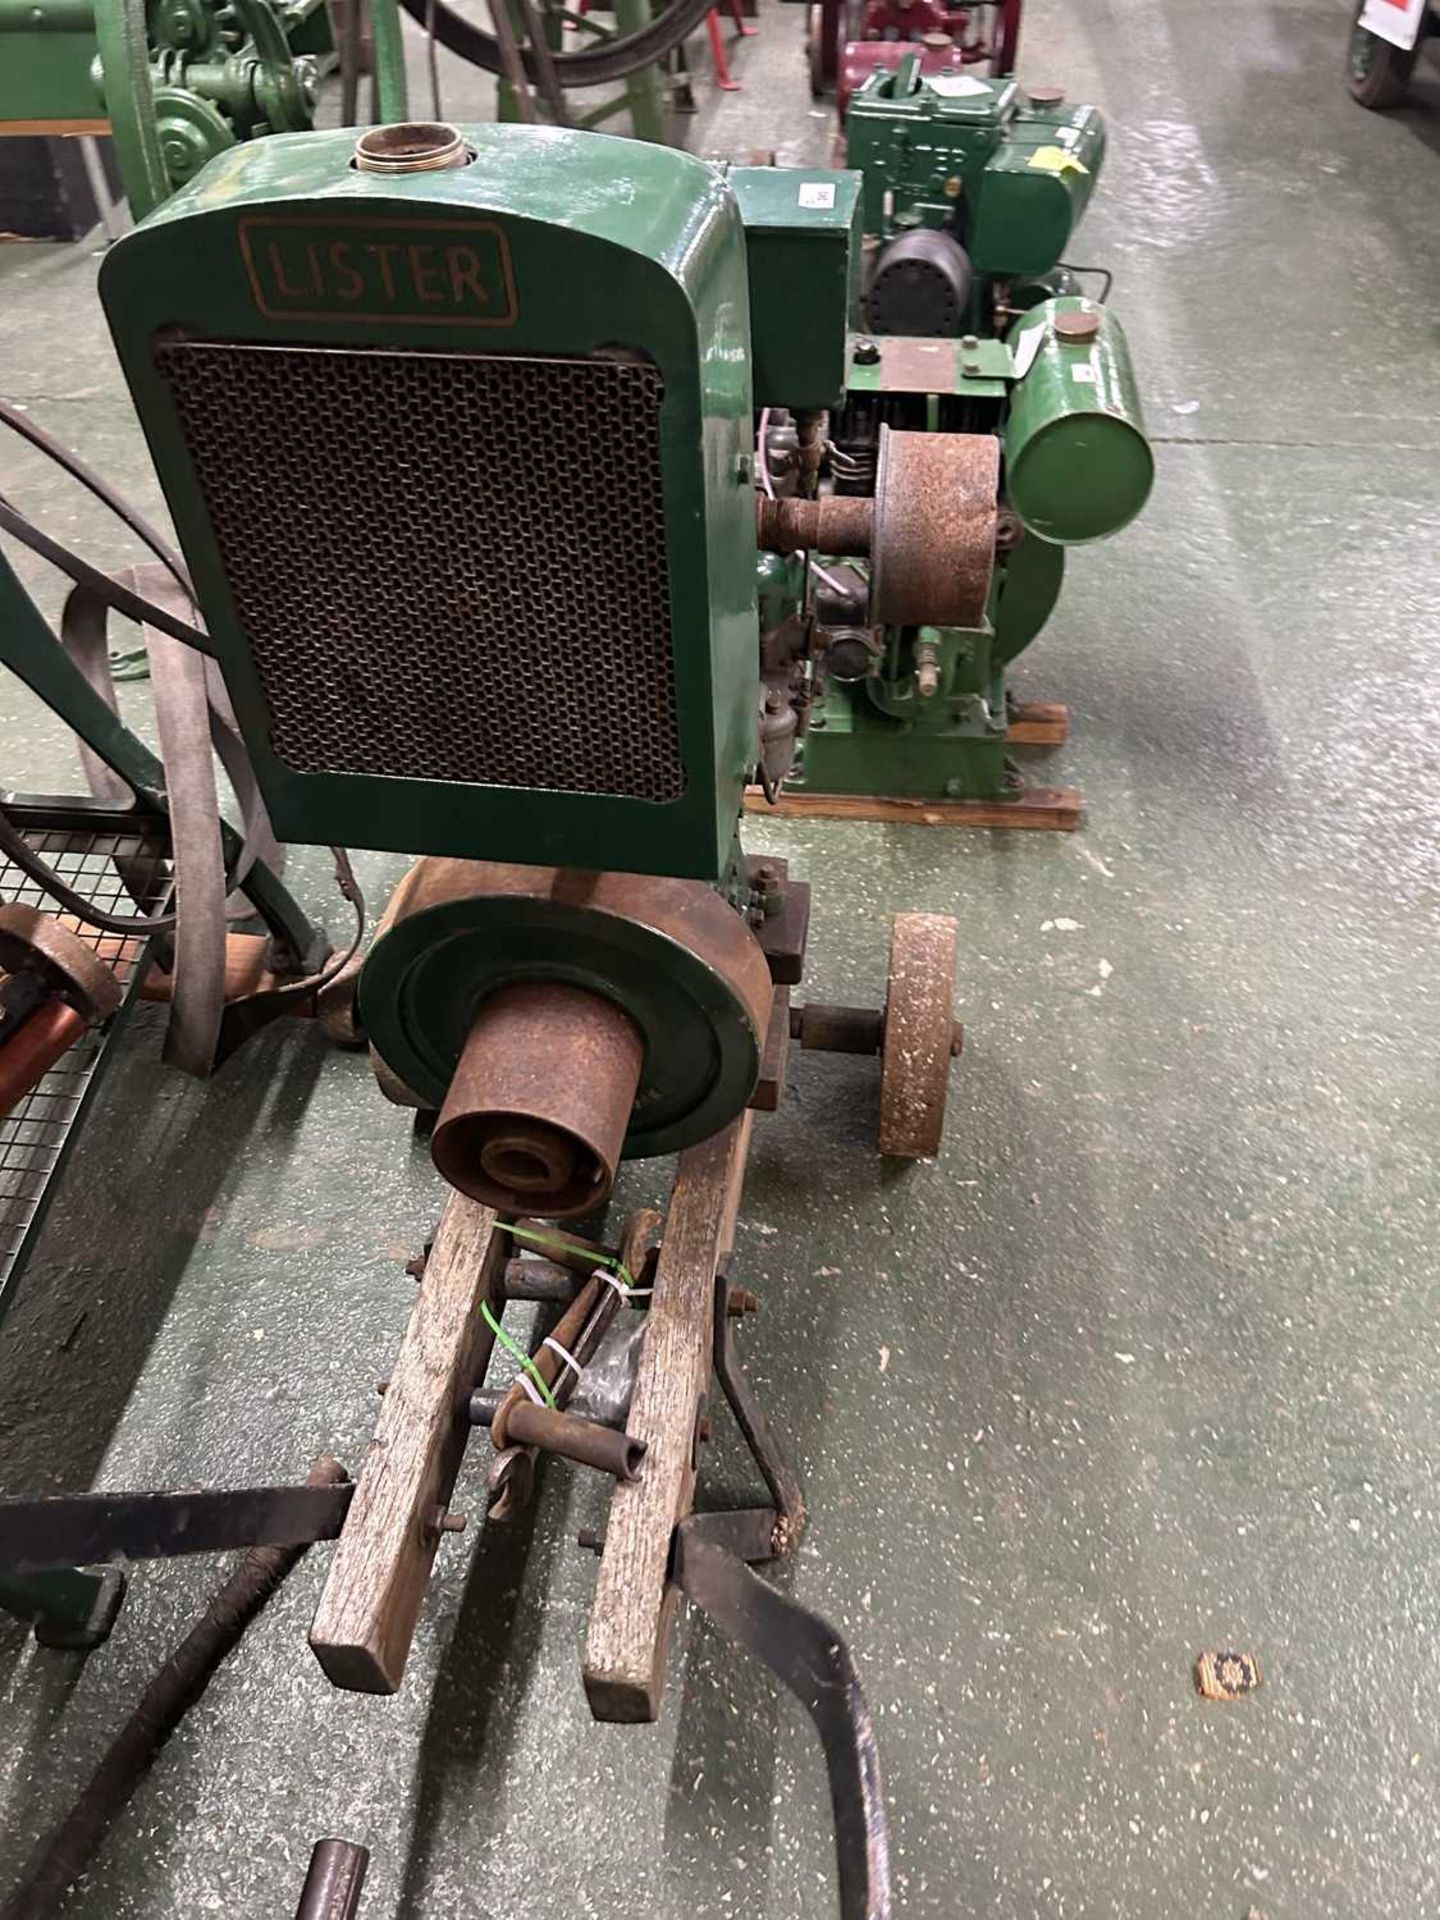 Lister 105/540 stationary engine on two-handled trolley - Image 2 of 4